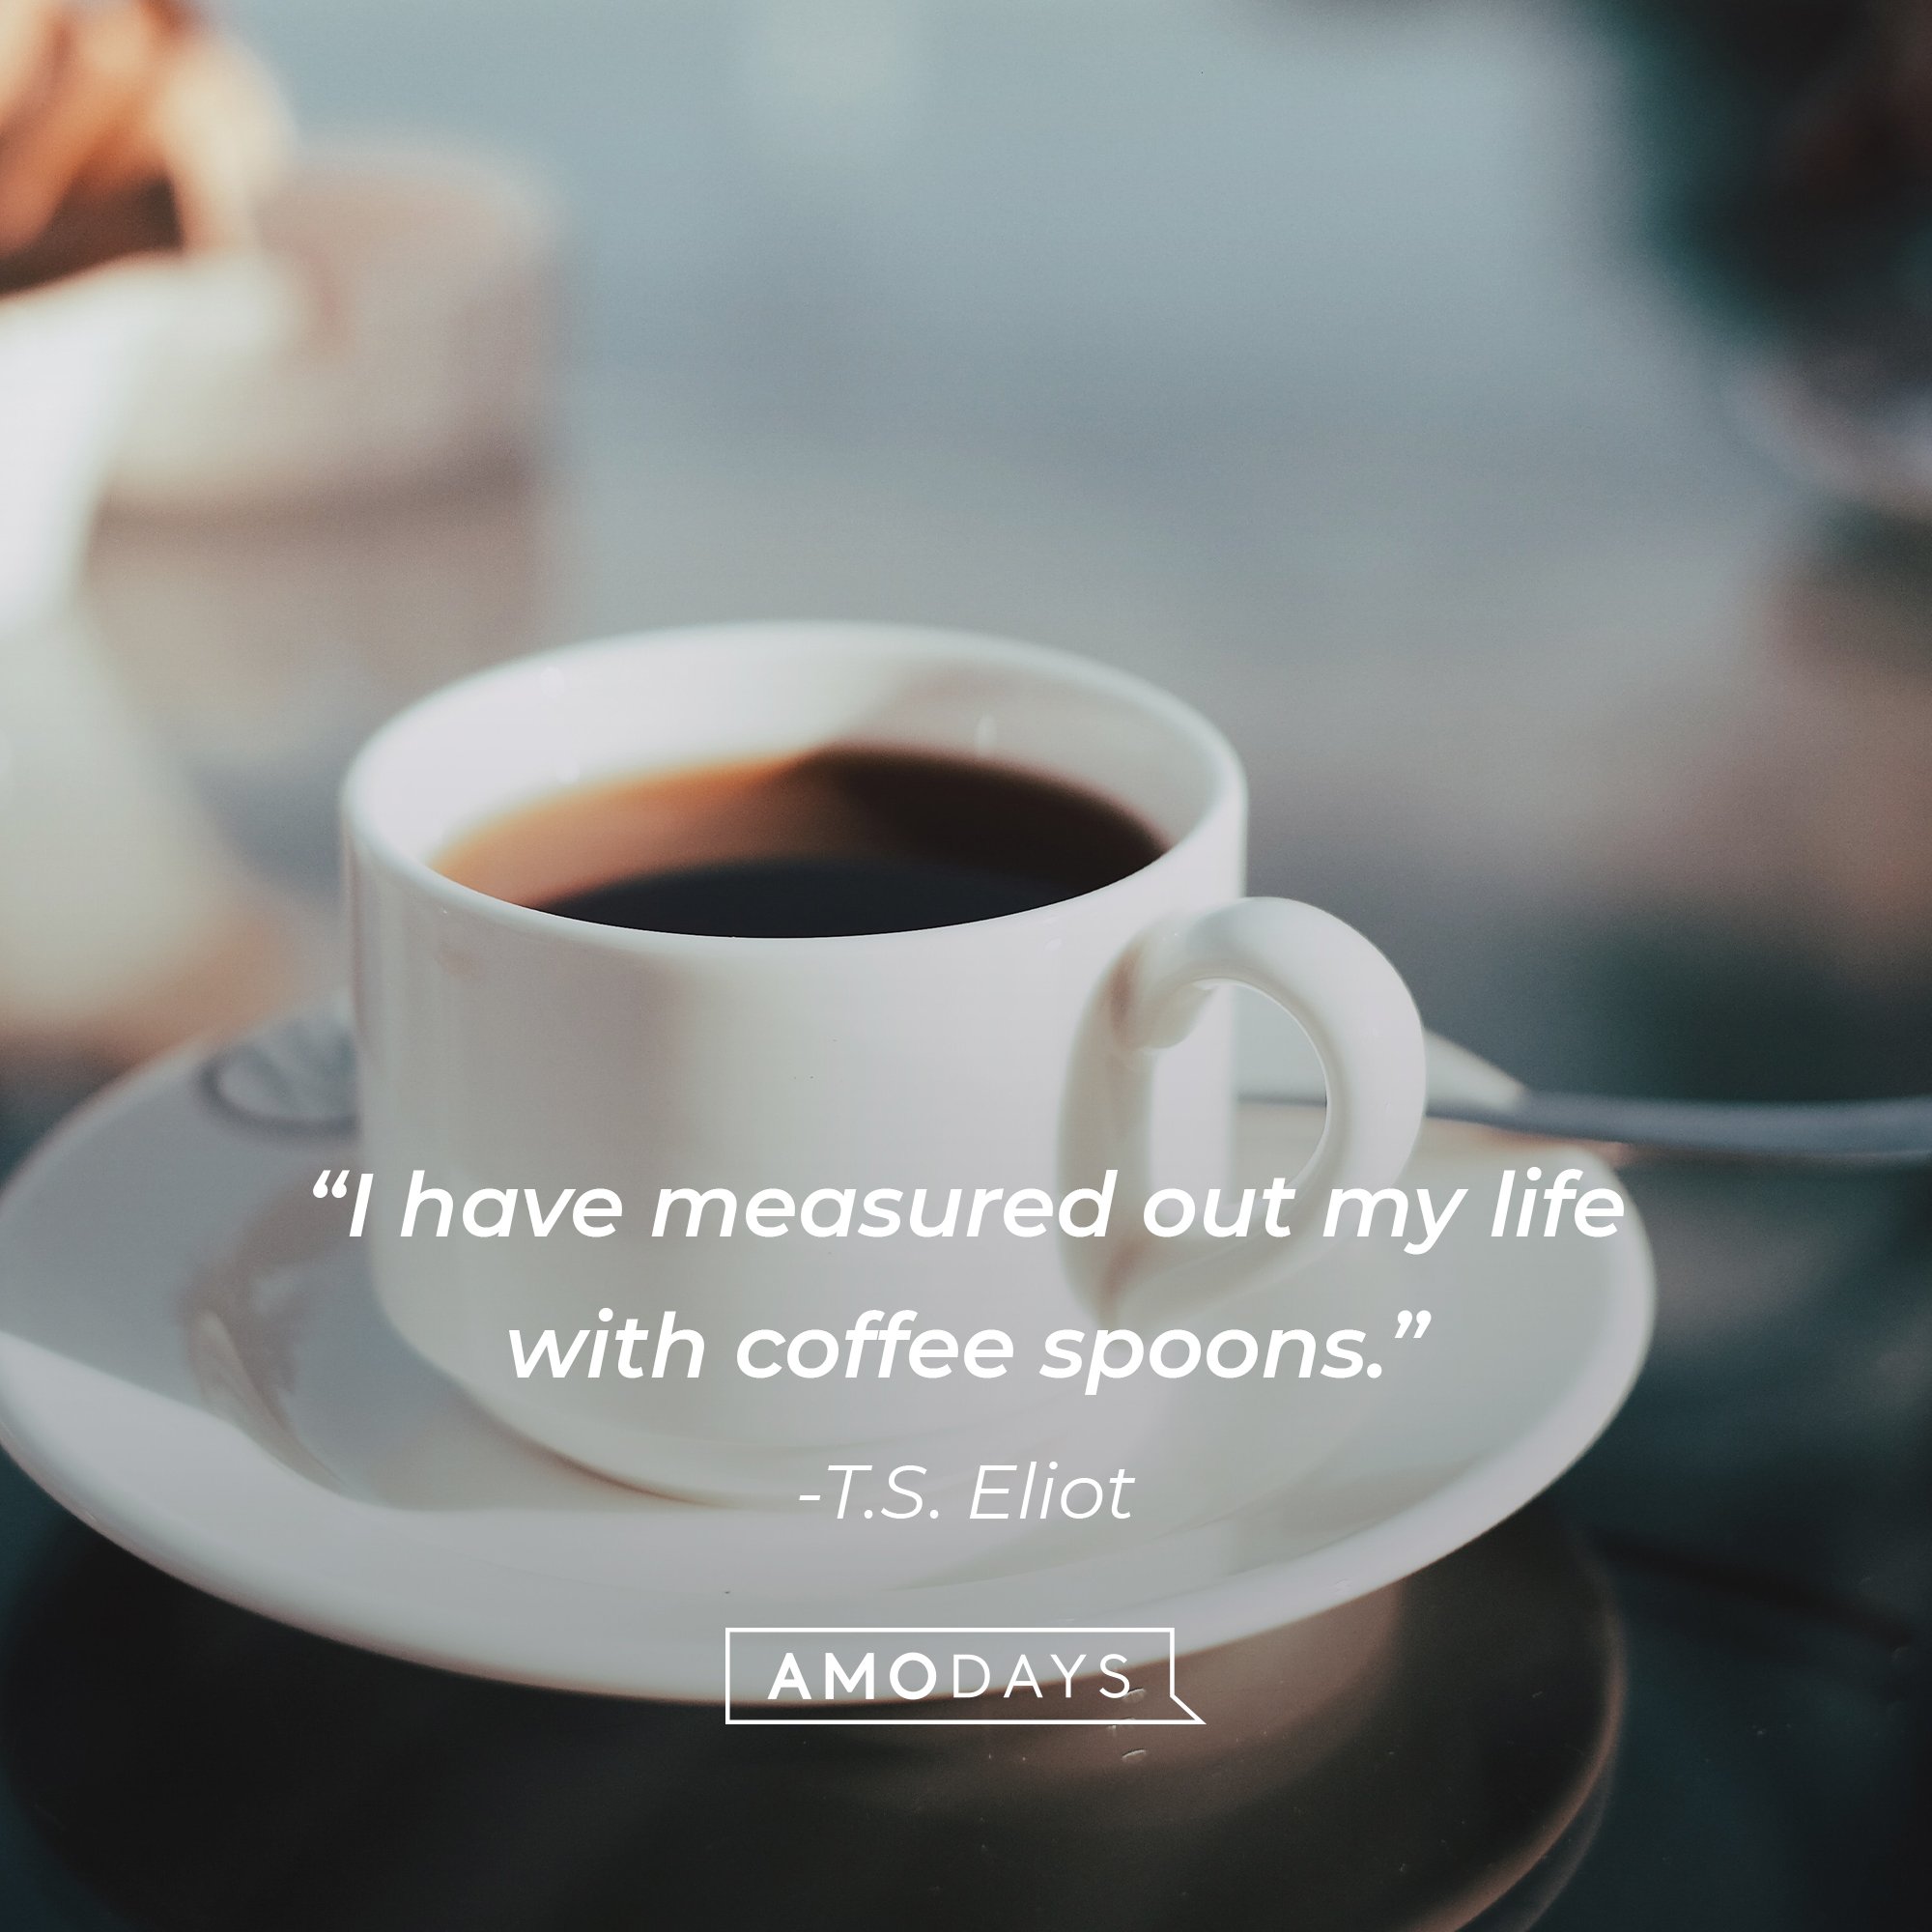 T.S. Eliot's quote: "I have measured out my life with coffee spoons." | Image: AmoDays